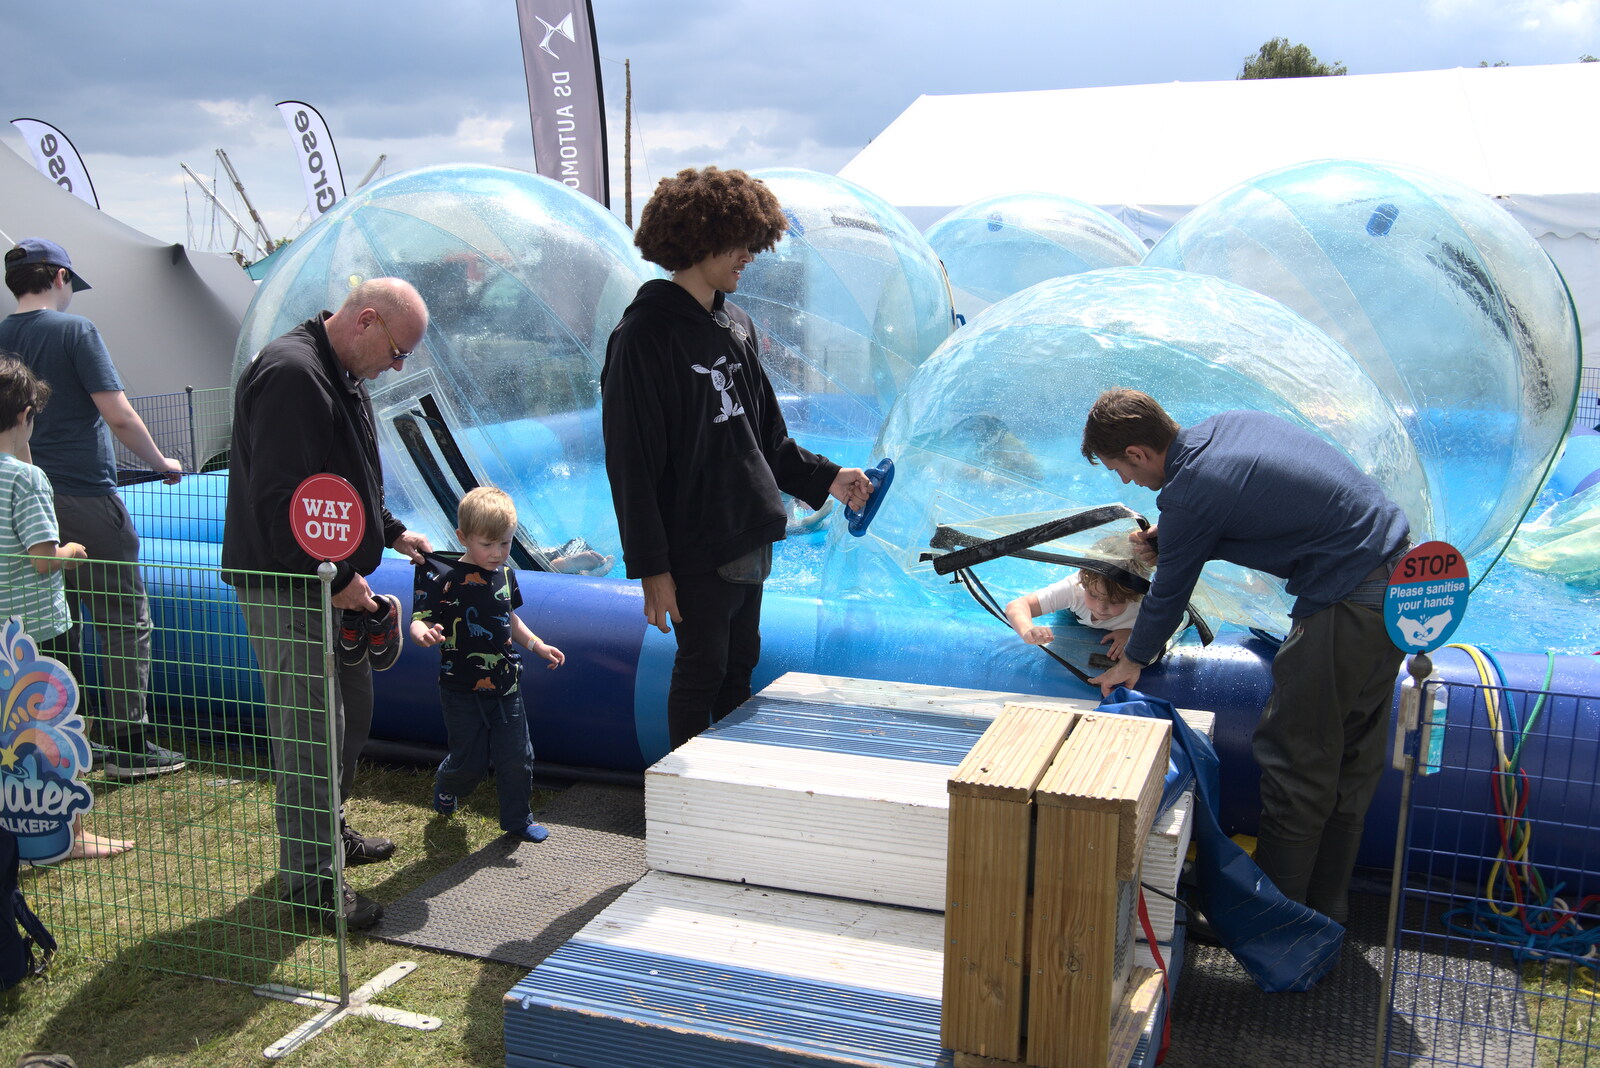 The Suffolk Show, Trinity Park, Ipswich - 1st June 2022: Kids have fun in floating Zorb balls